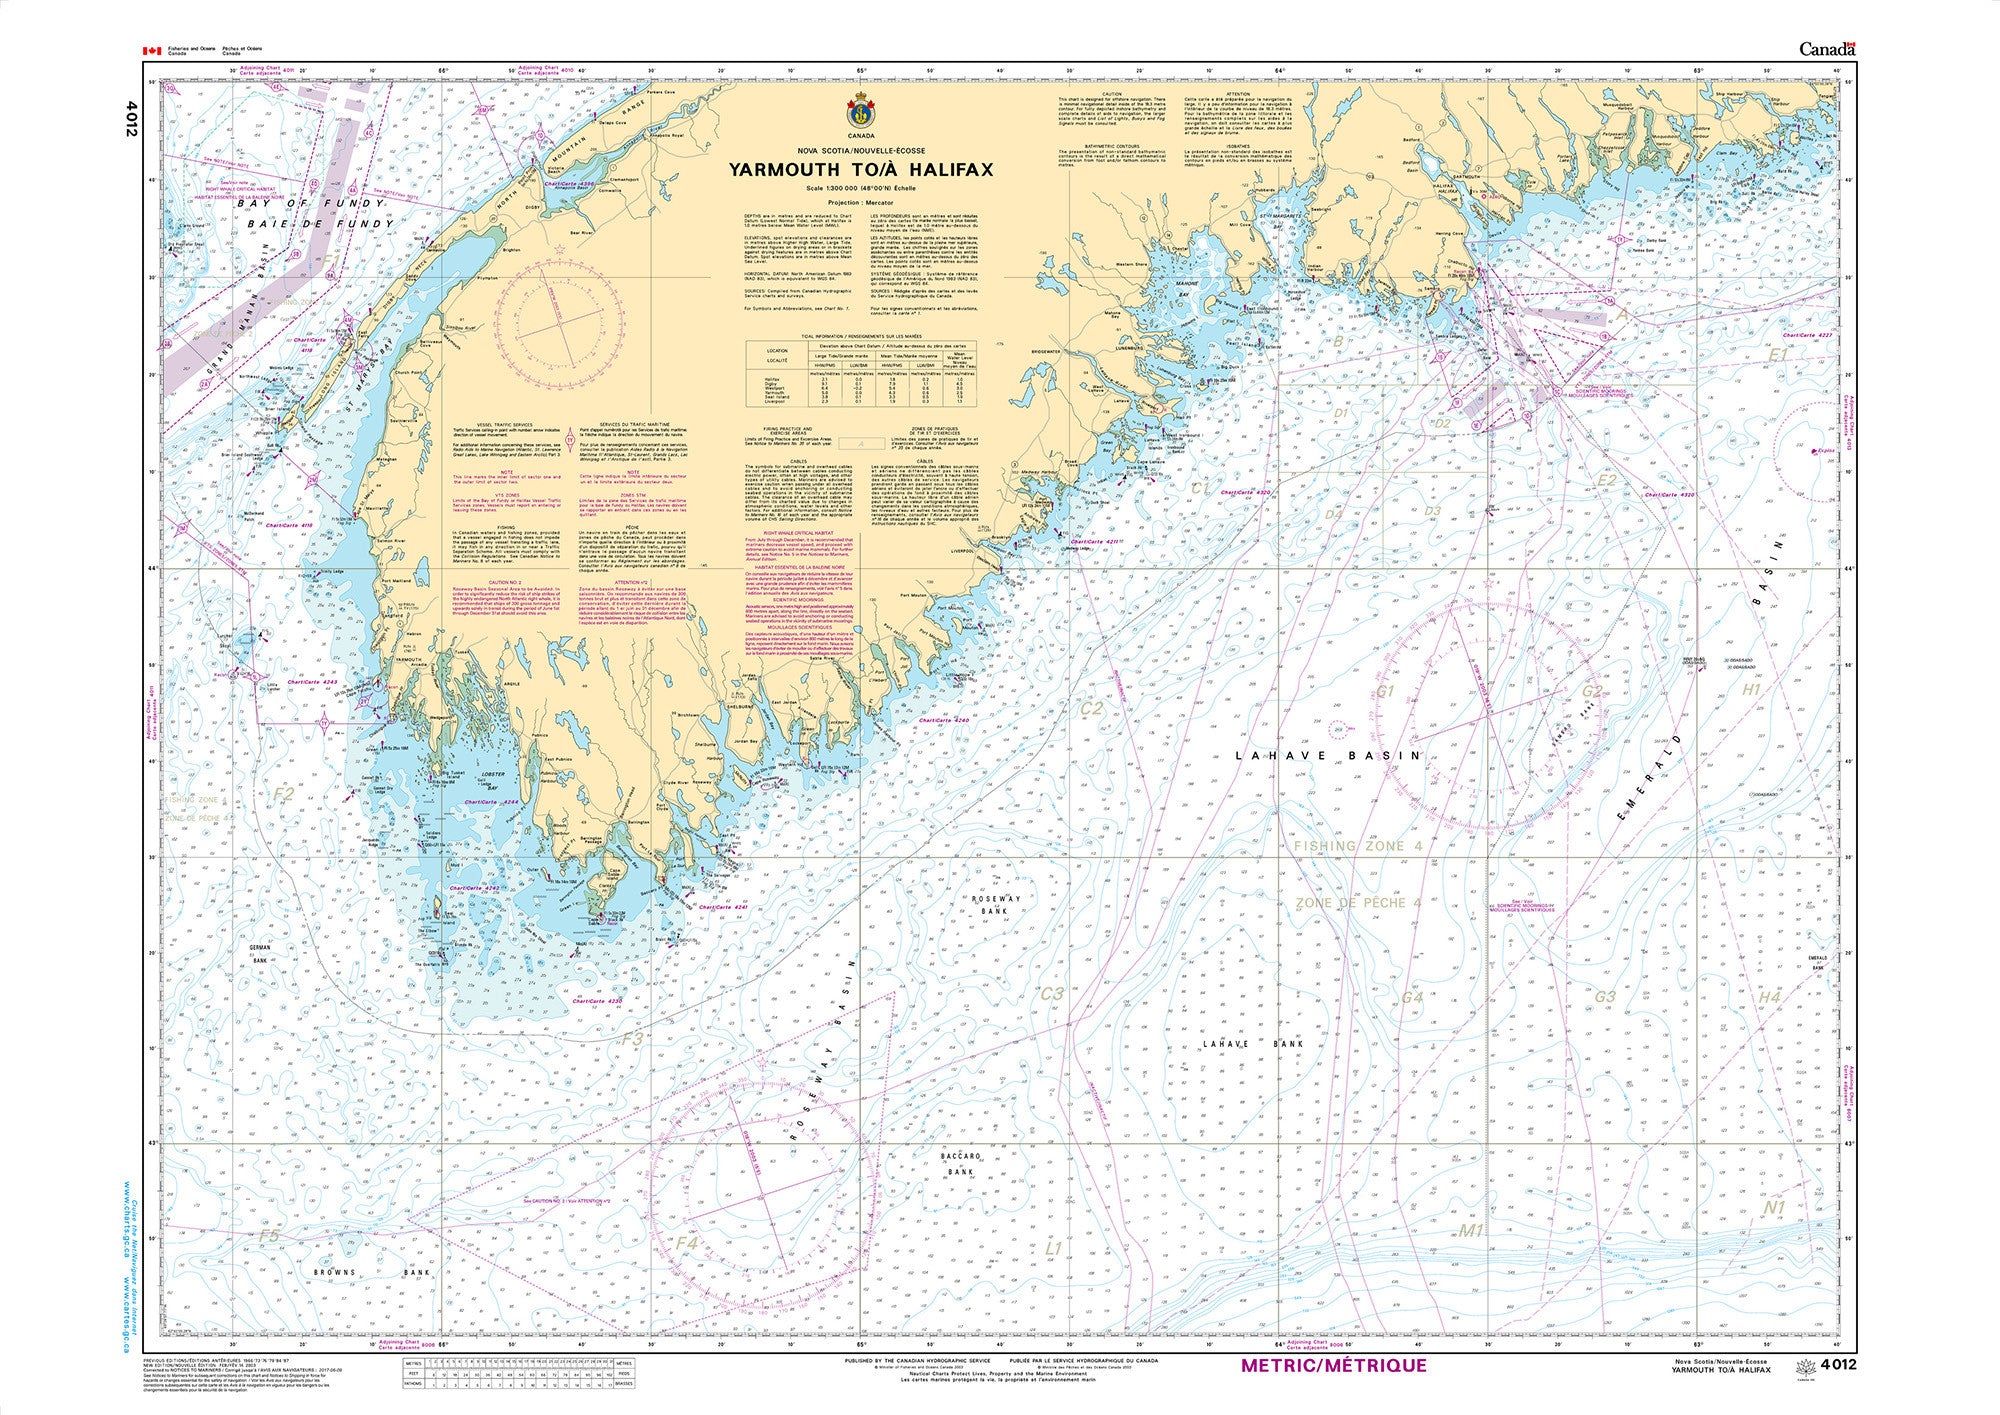 Canadian Hydrographic Service Nautical Chart CHS4012: Yarmouth to/à Halifax